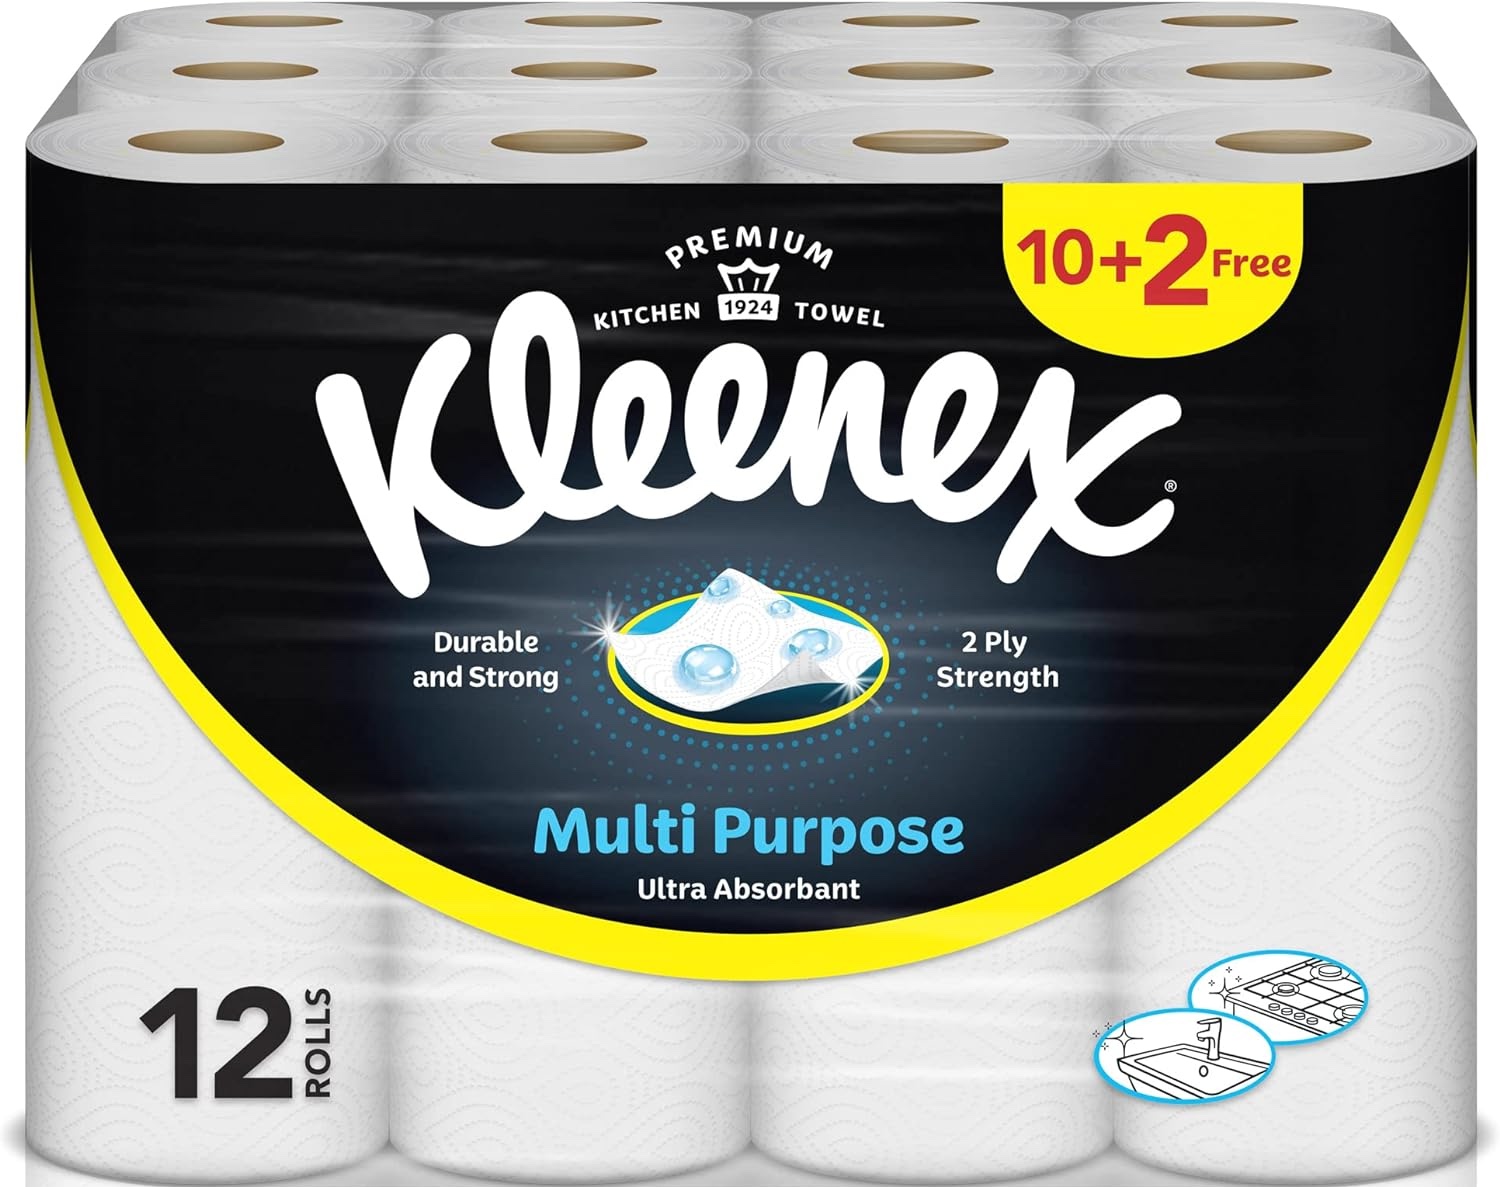 Kleenex Multi Purpose Kitchen Tissue Paper Towel 40 Sheets 2 PLY 12 Rolls Absorbent Towels for all Surfaces